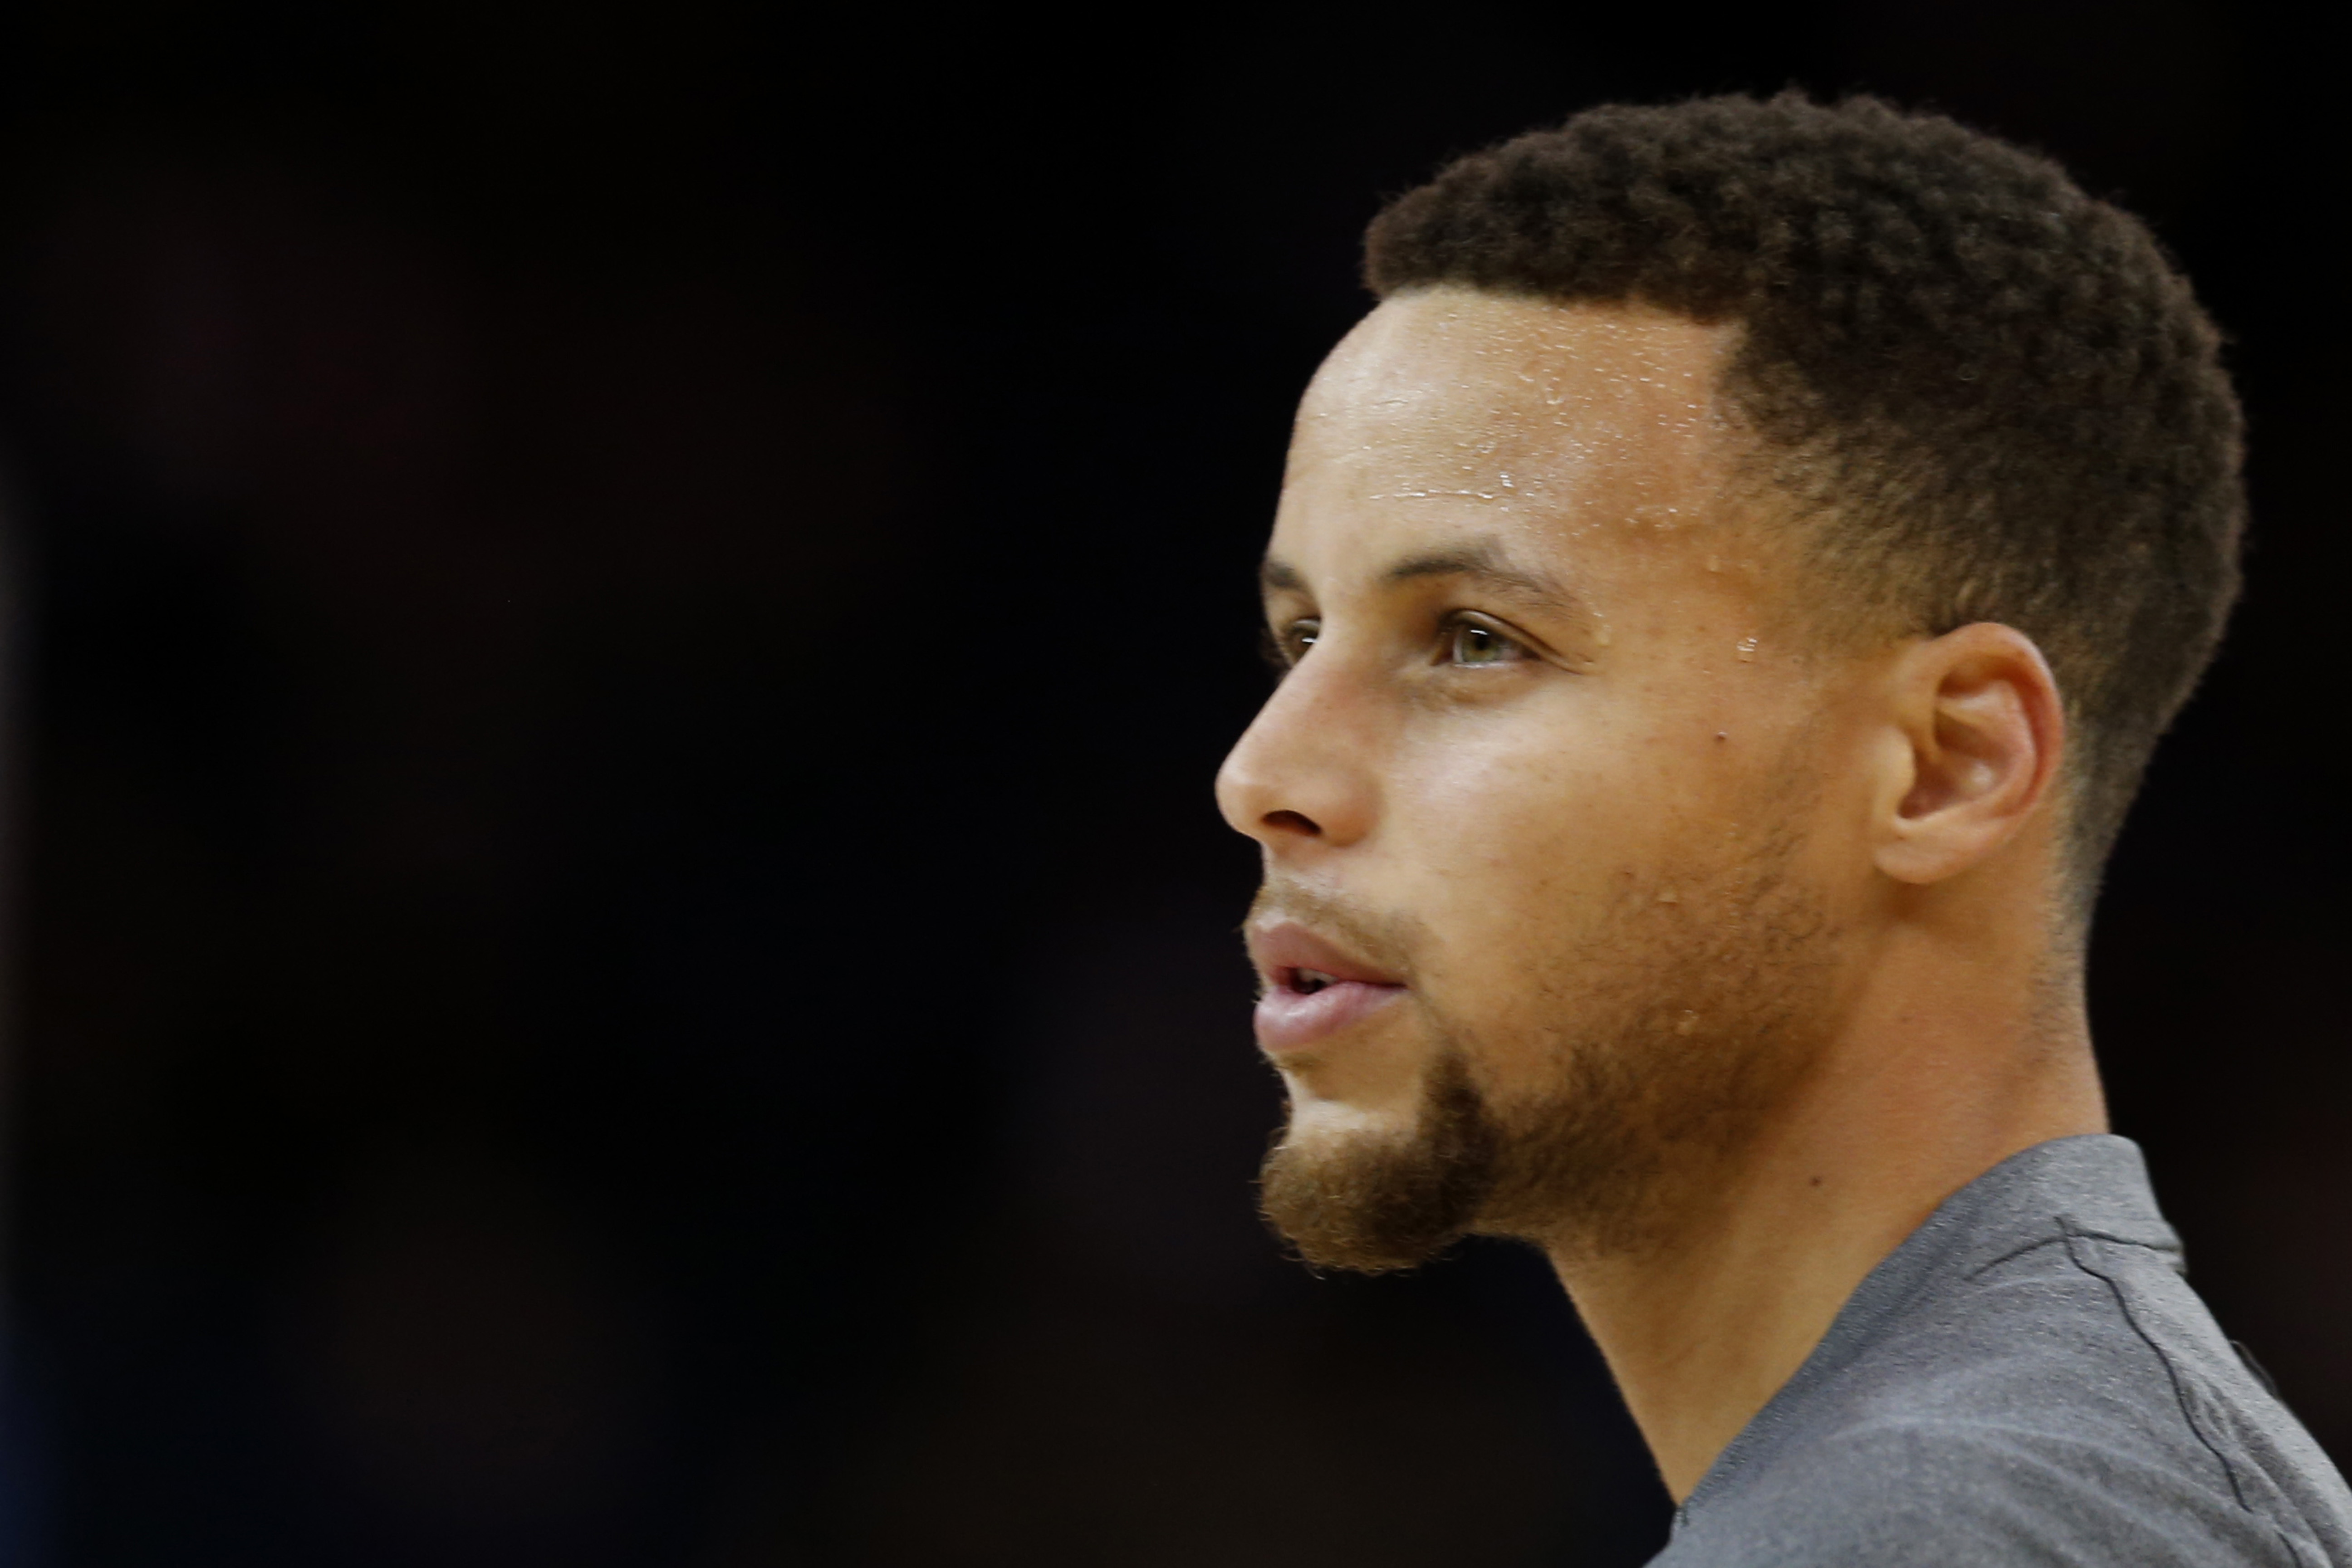 Steph Curry Gives His Opinion on North Carolina's Controversial HB...